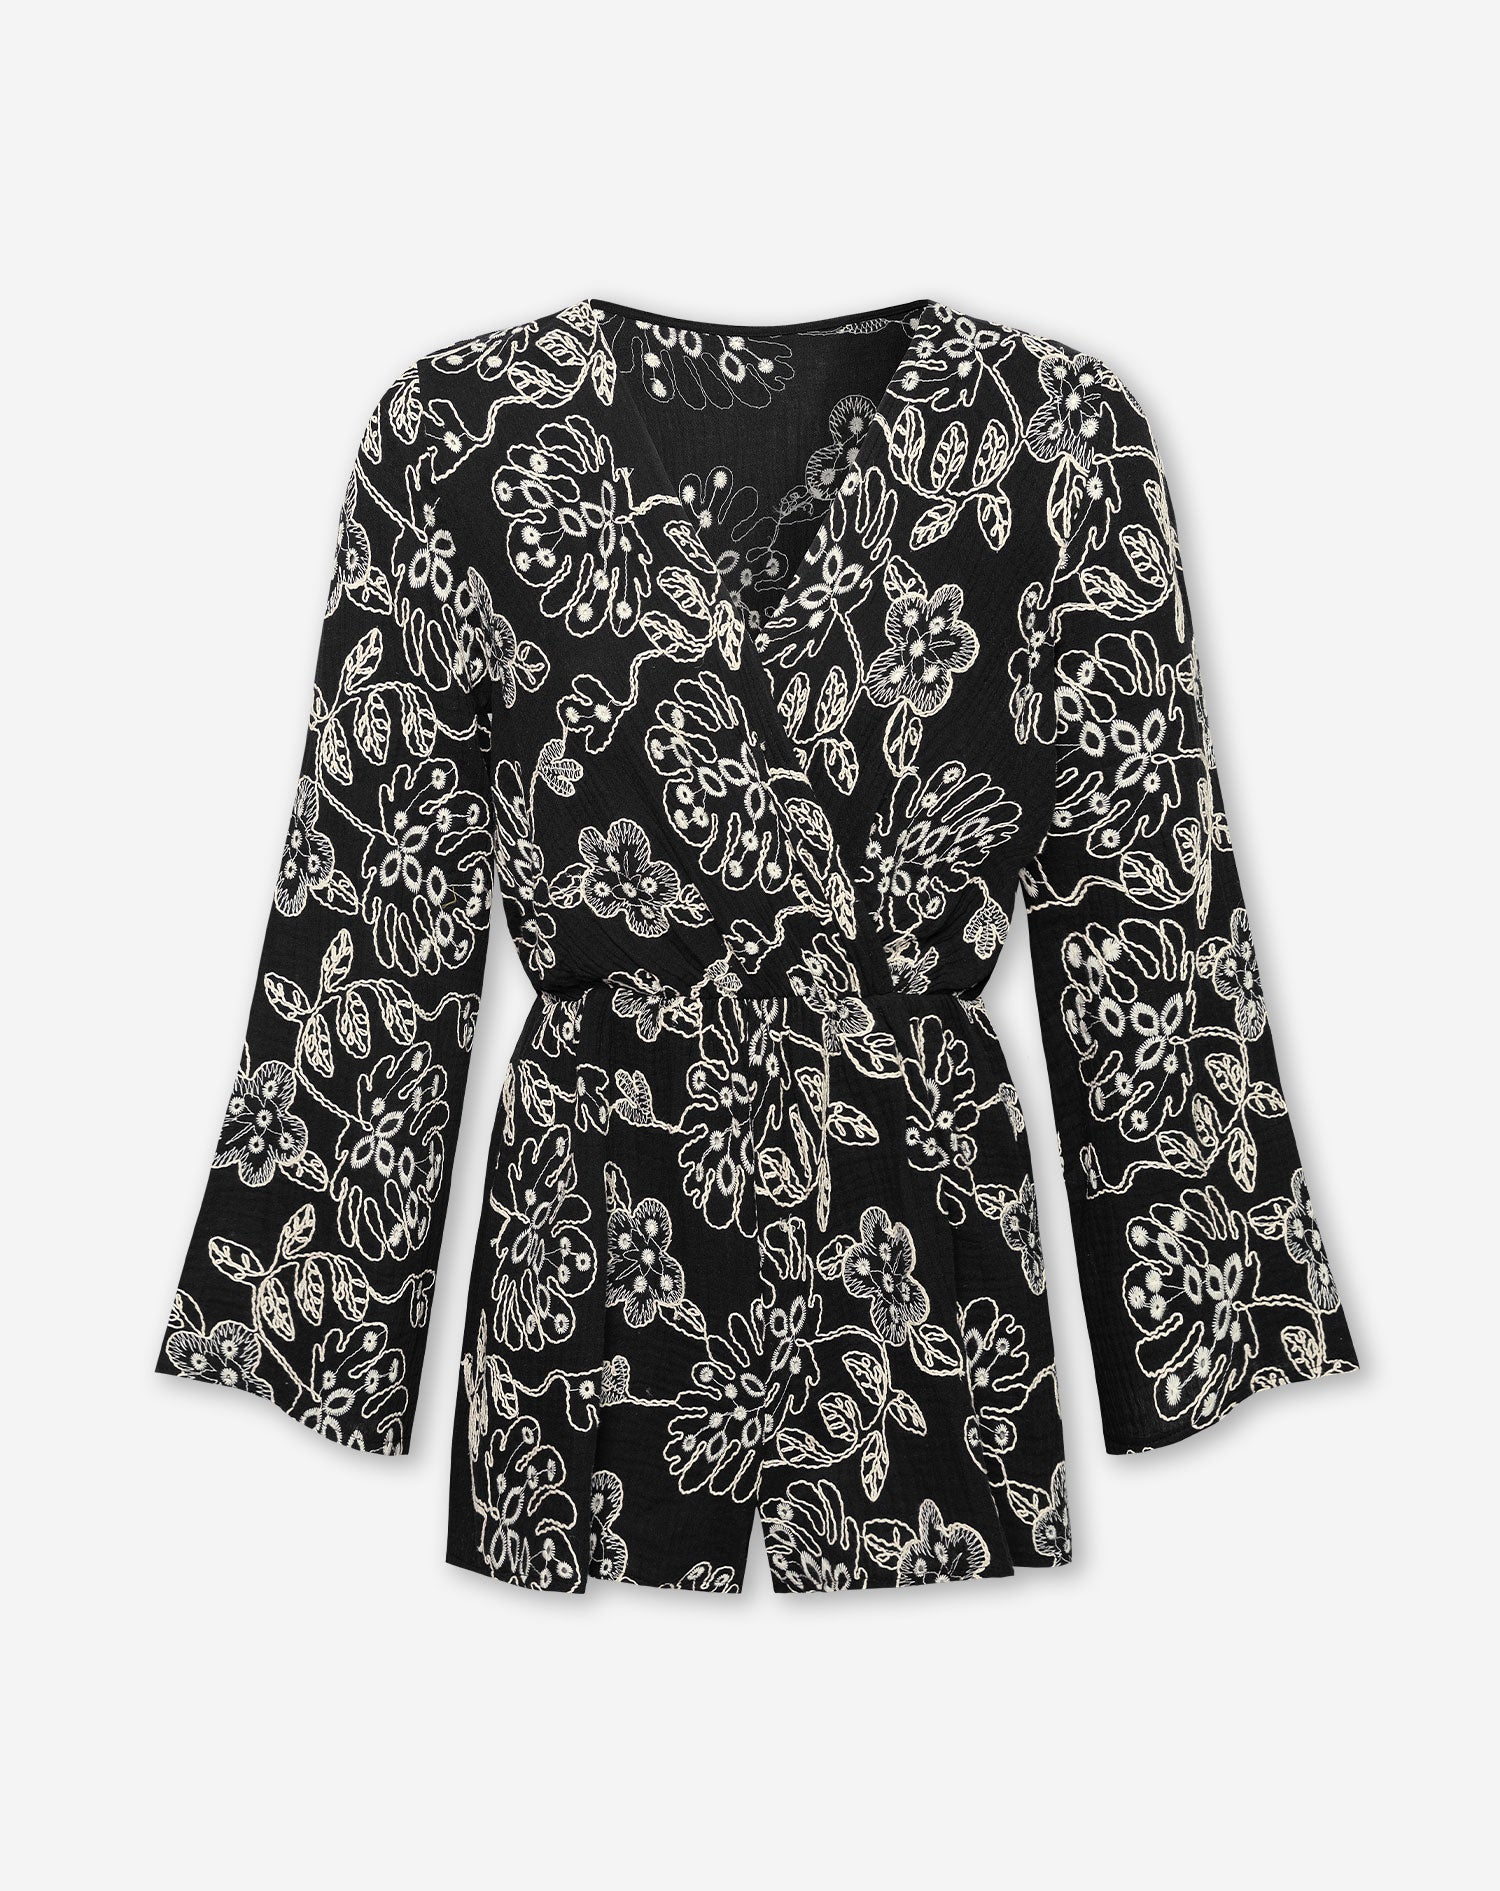 FLOWER EMBROIDERY PLAYSUIT BLACK